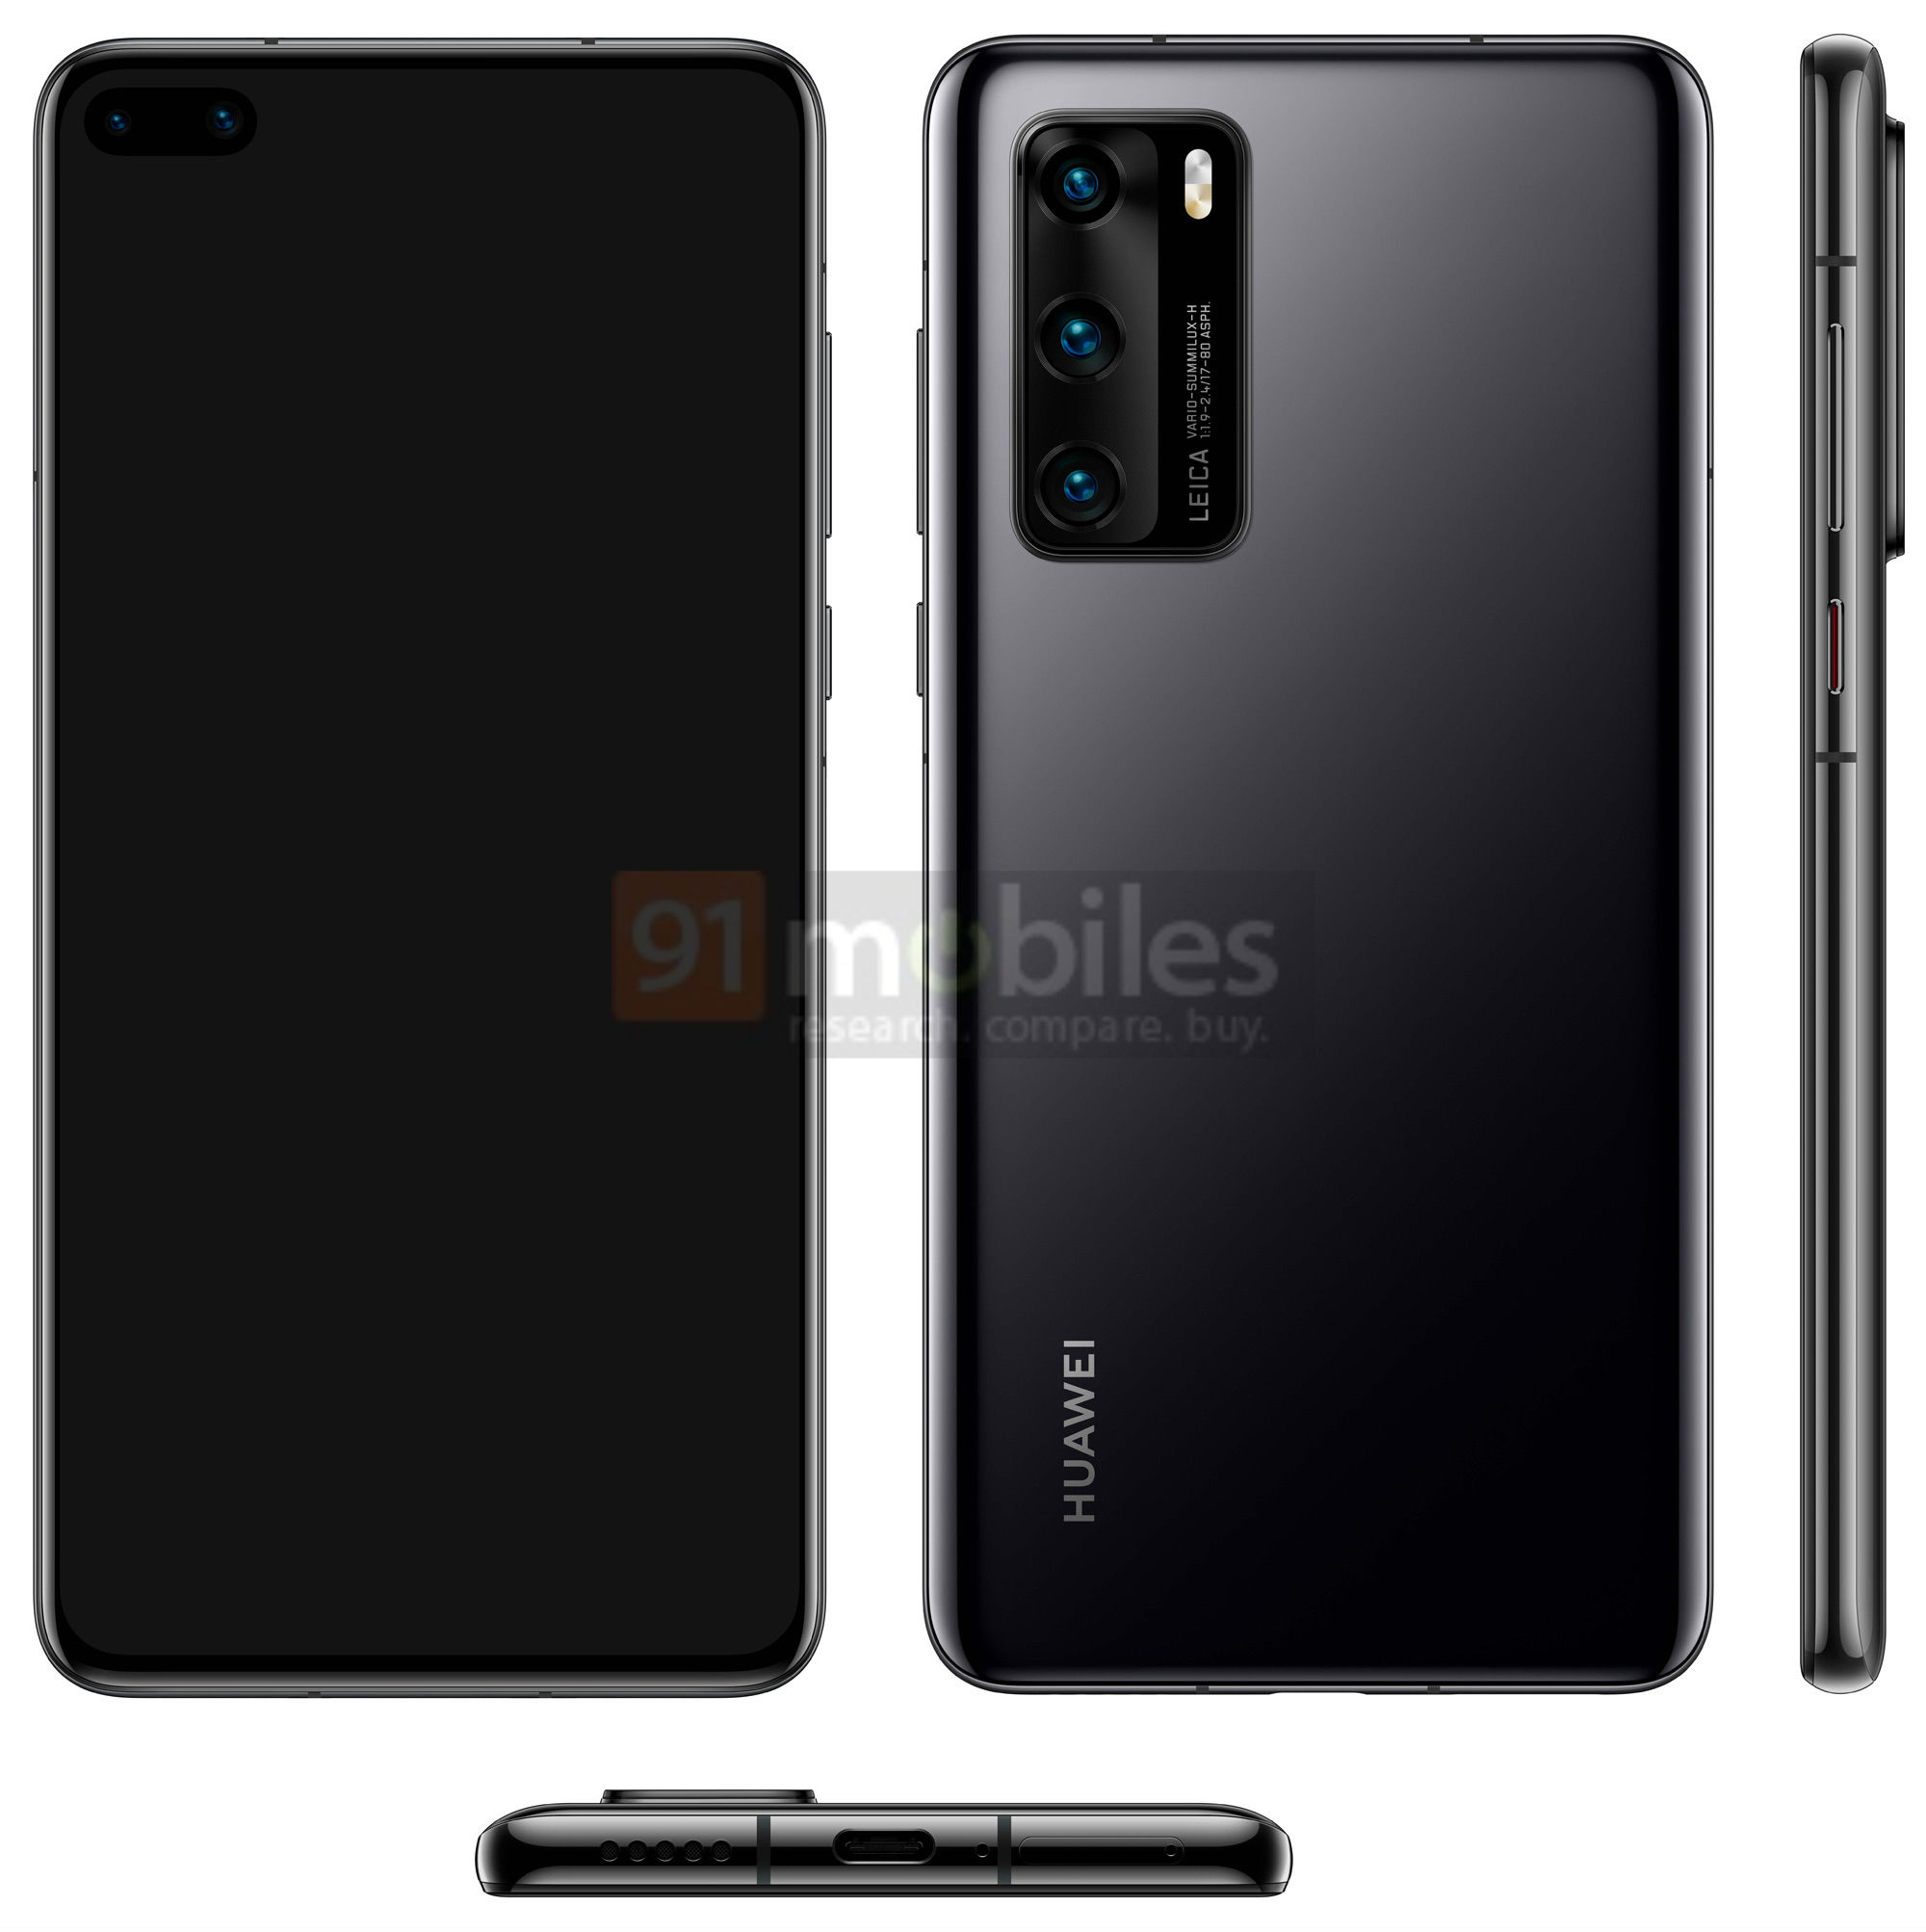 Huawei P40 Pro - Specifications